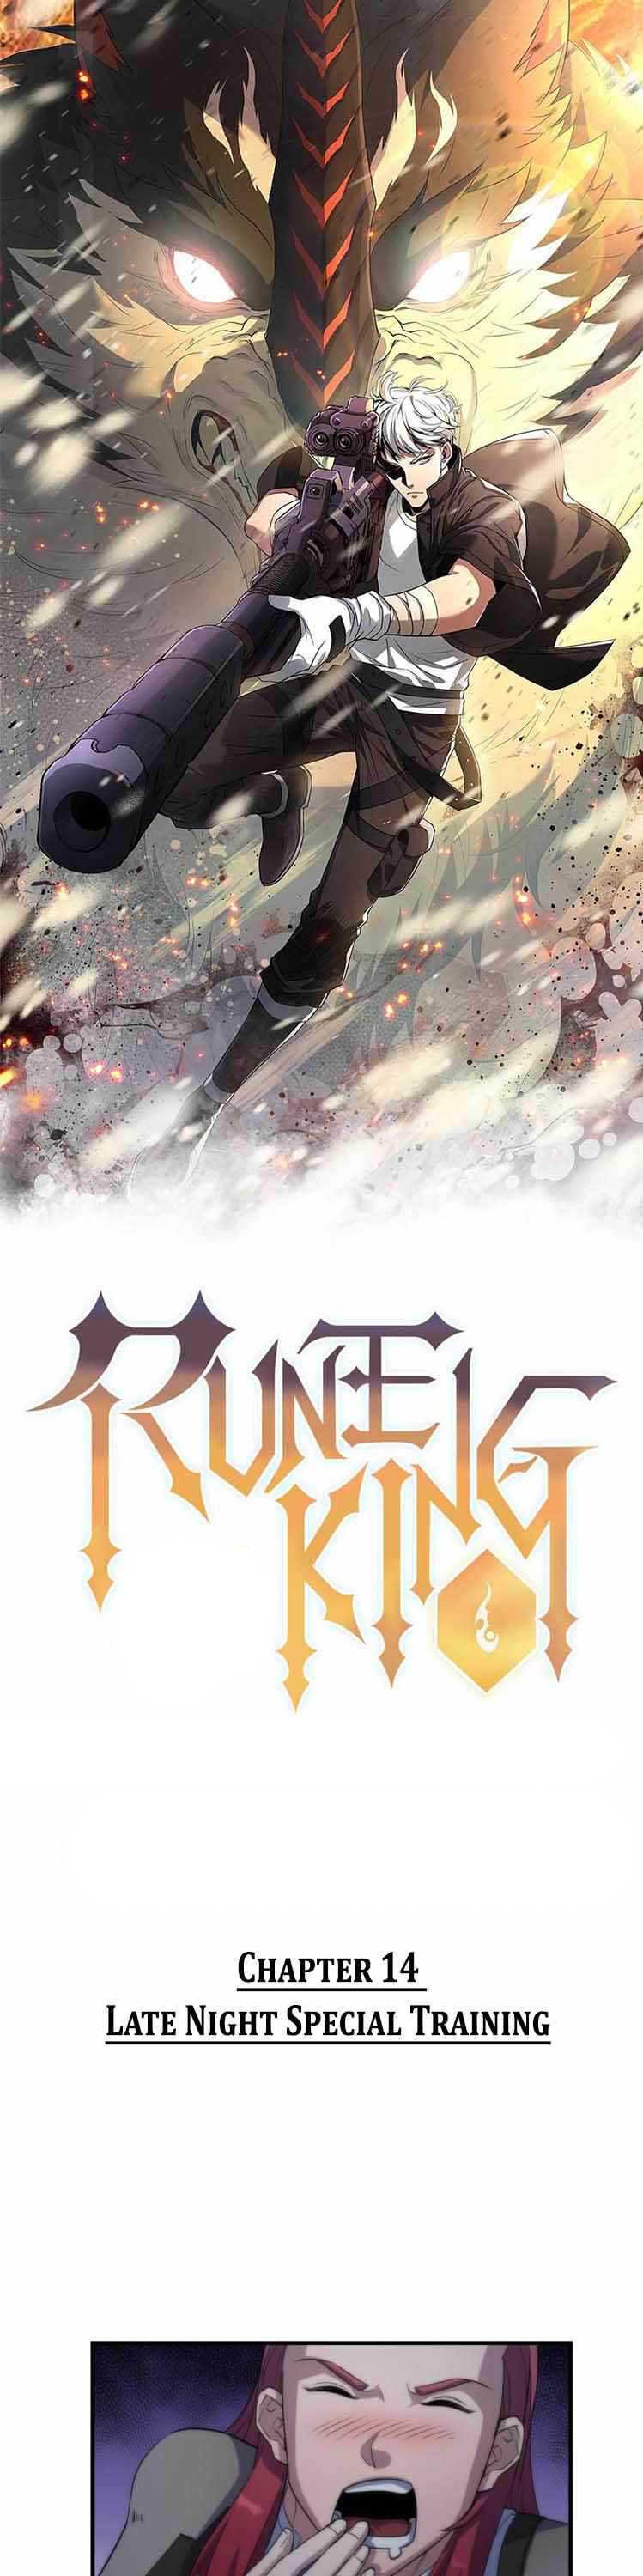 King of Runes Chapter 14